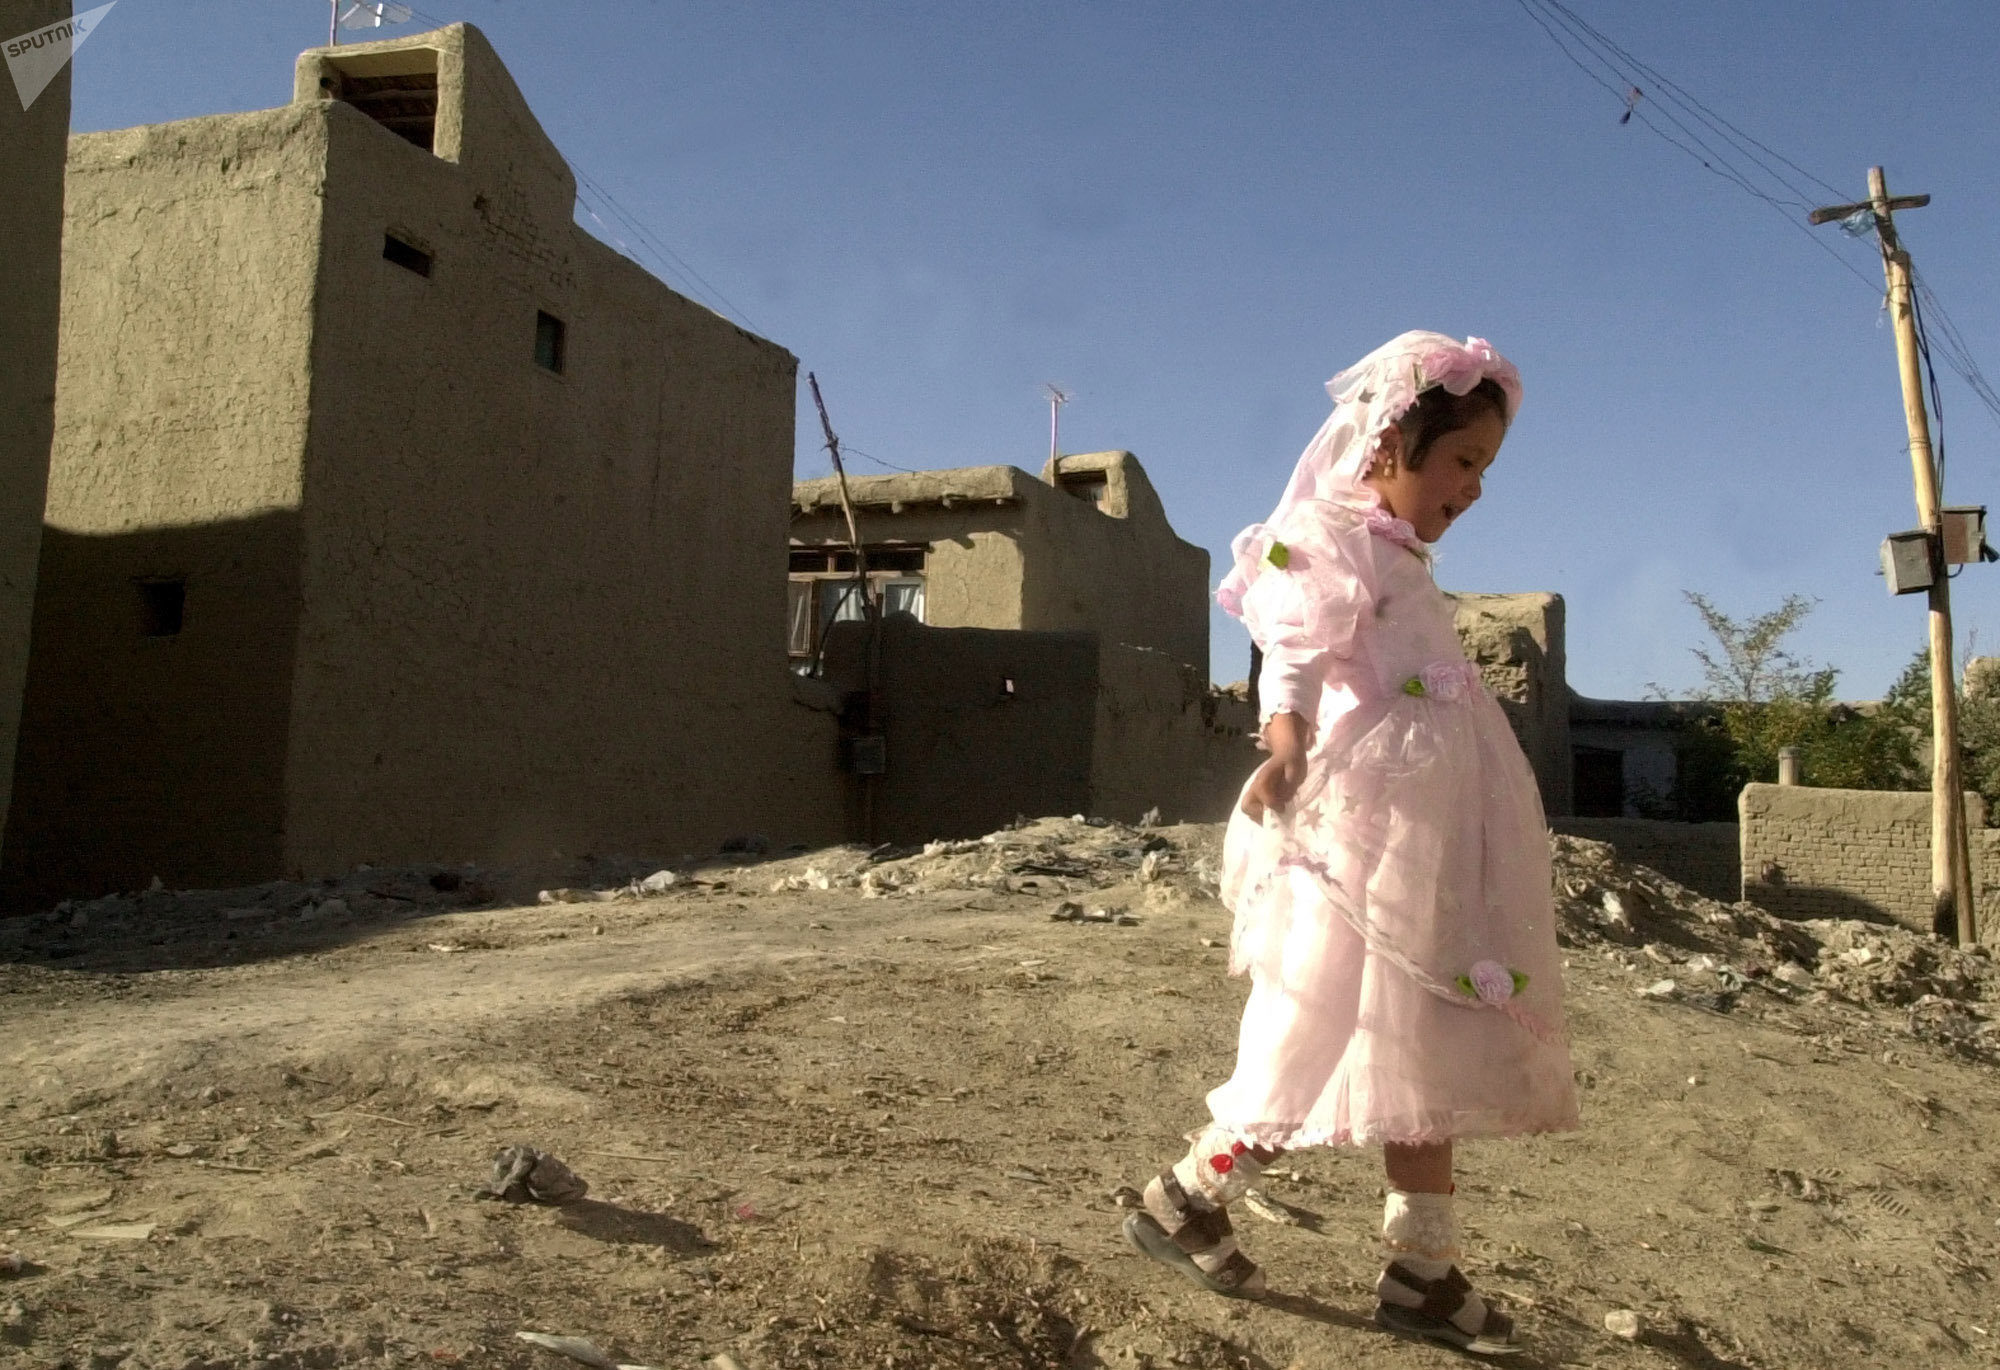 Fareema,7, plays outside during a wedding party in Kabul, Afghanistan